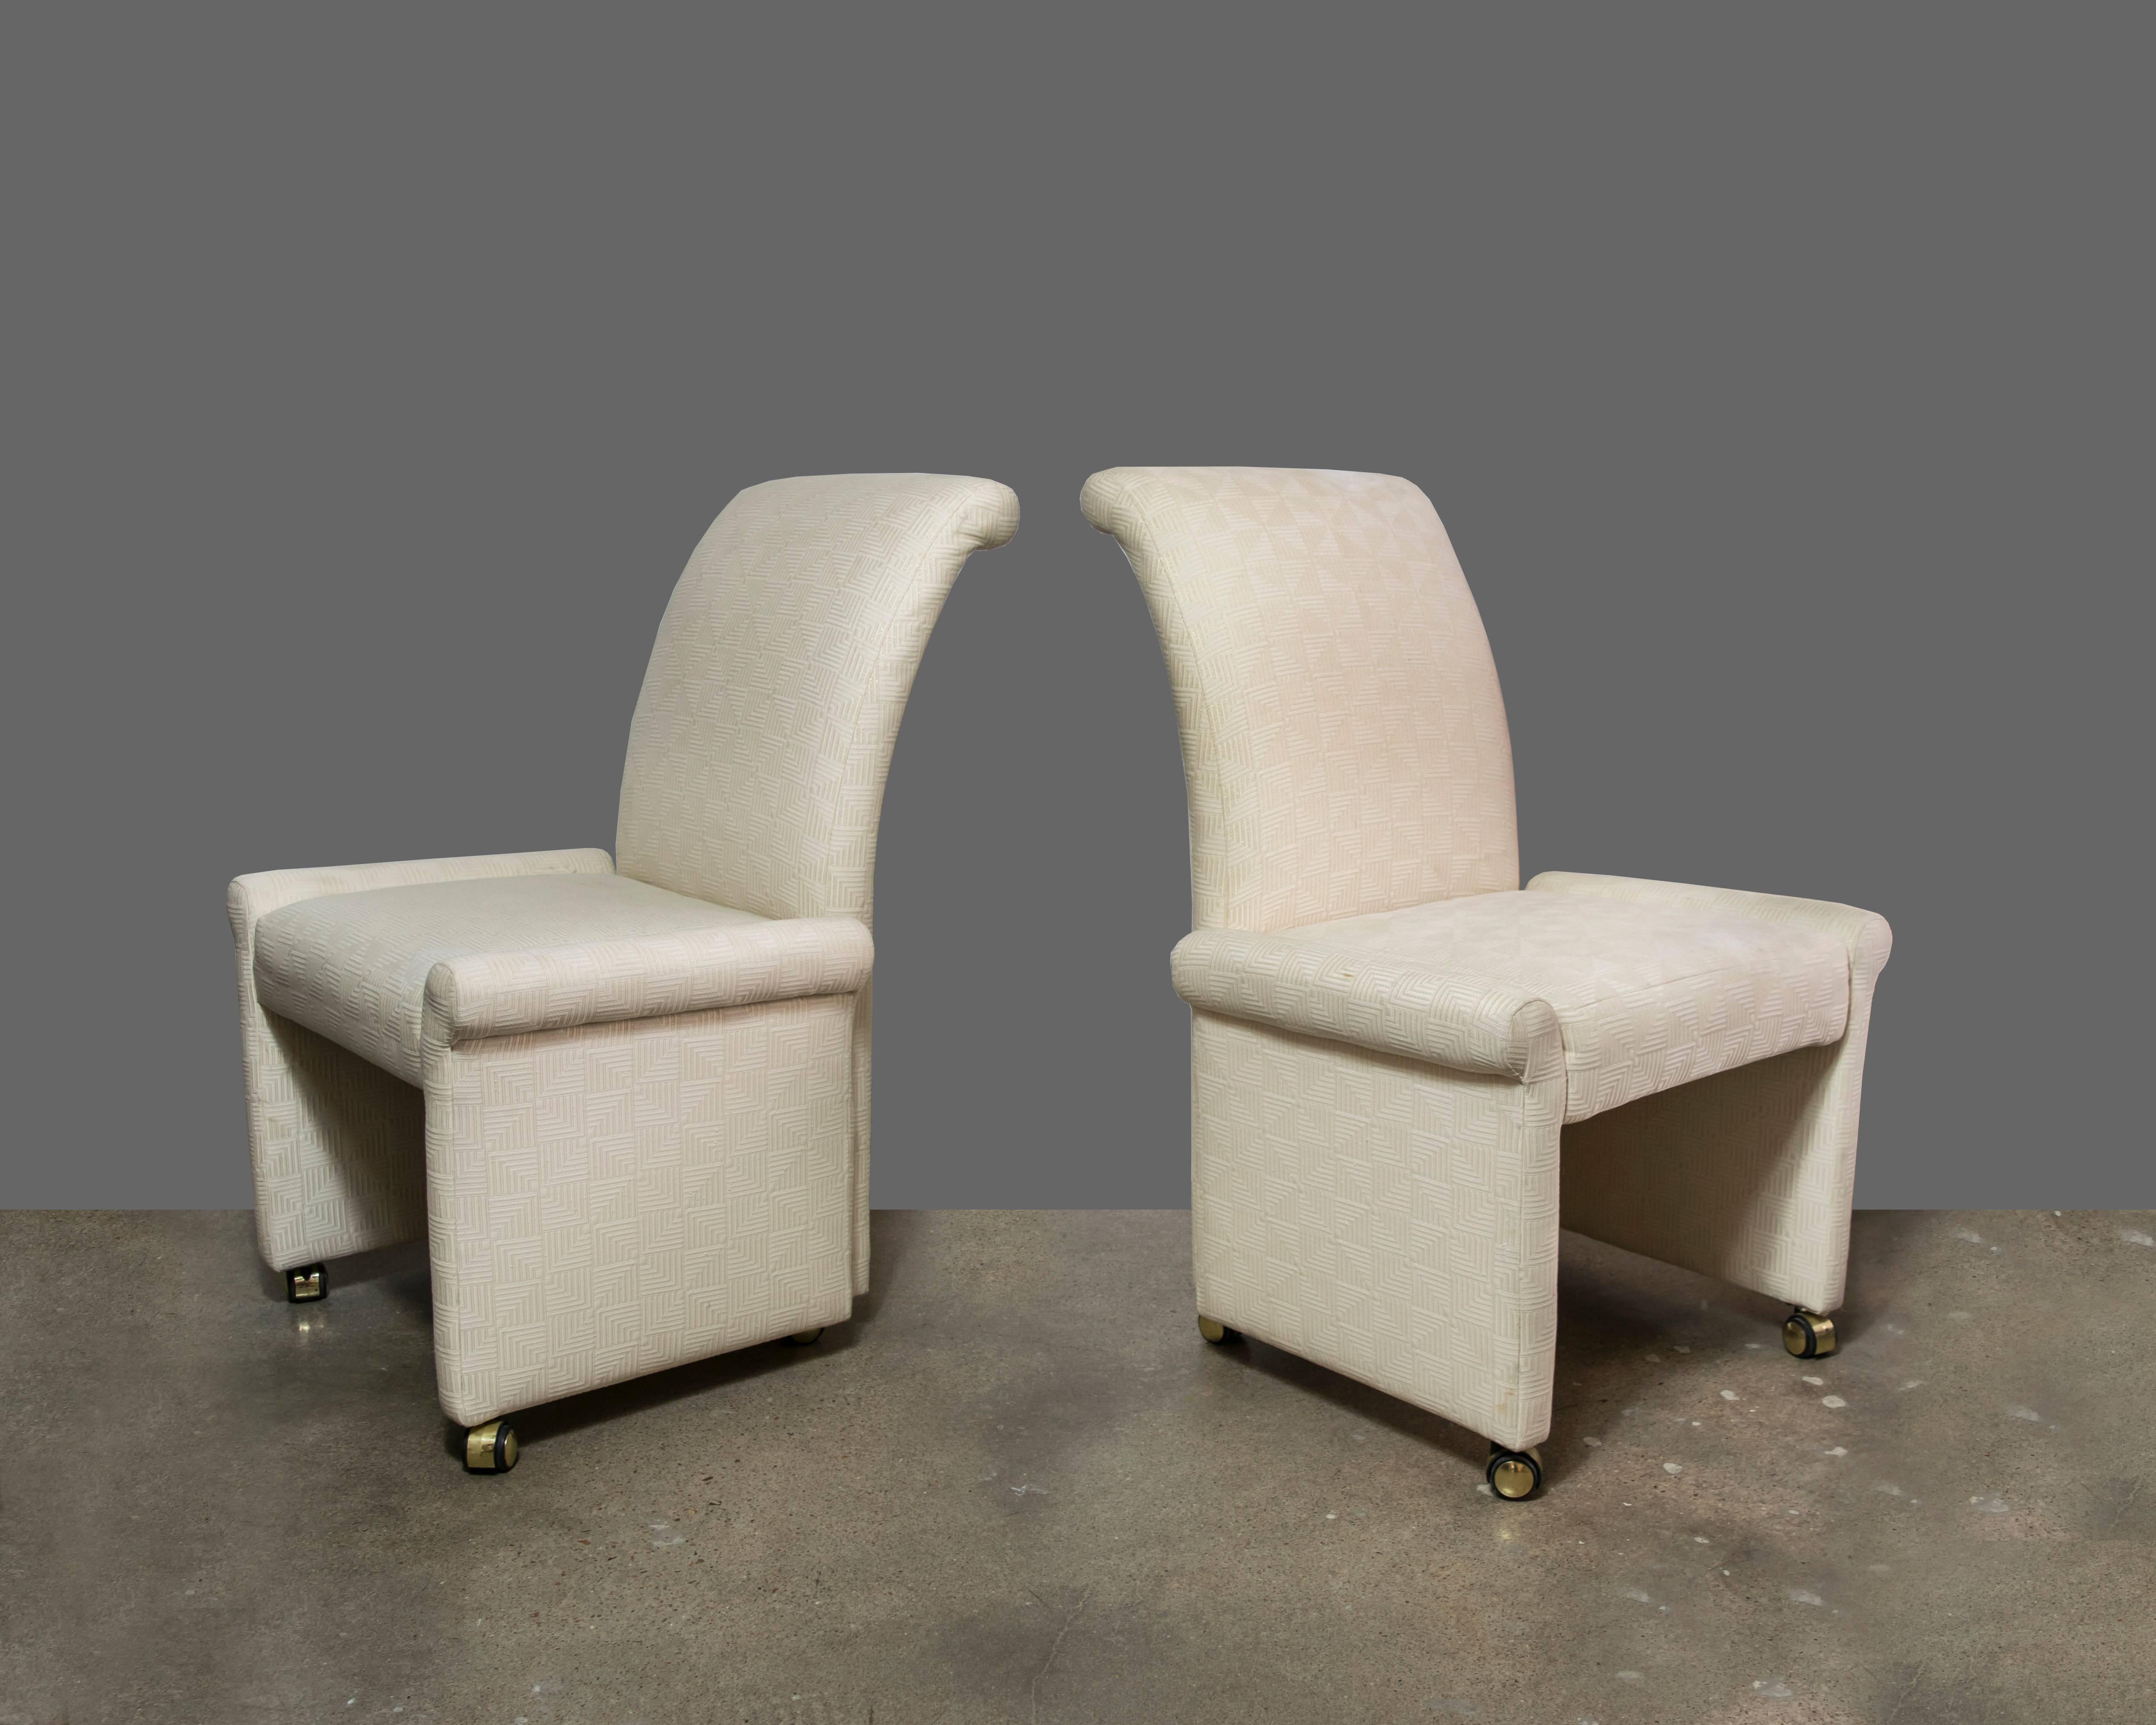 A set of six high back upholstered dining chairs by Milo Baughman for Thayer Coggin ready for upholstery. Two armchairs and four side chairs on brass rolling wheels. We can assist with upholstering with the fabric of your choice for an extra fee.